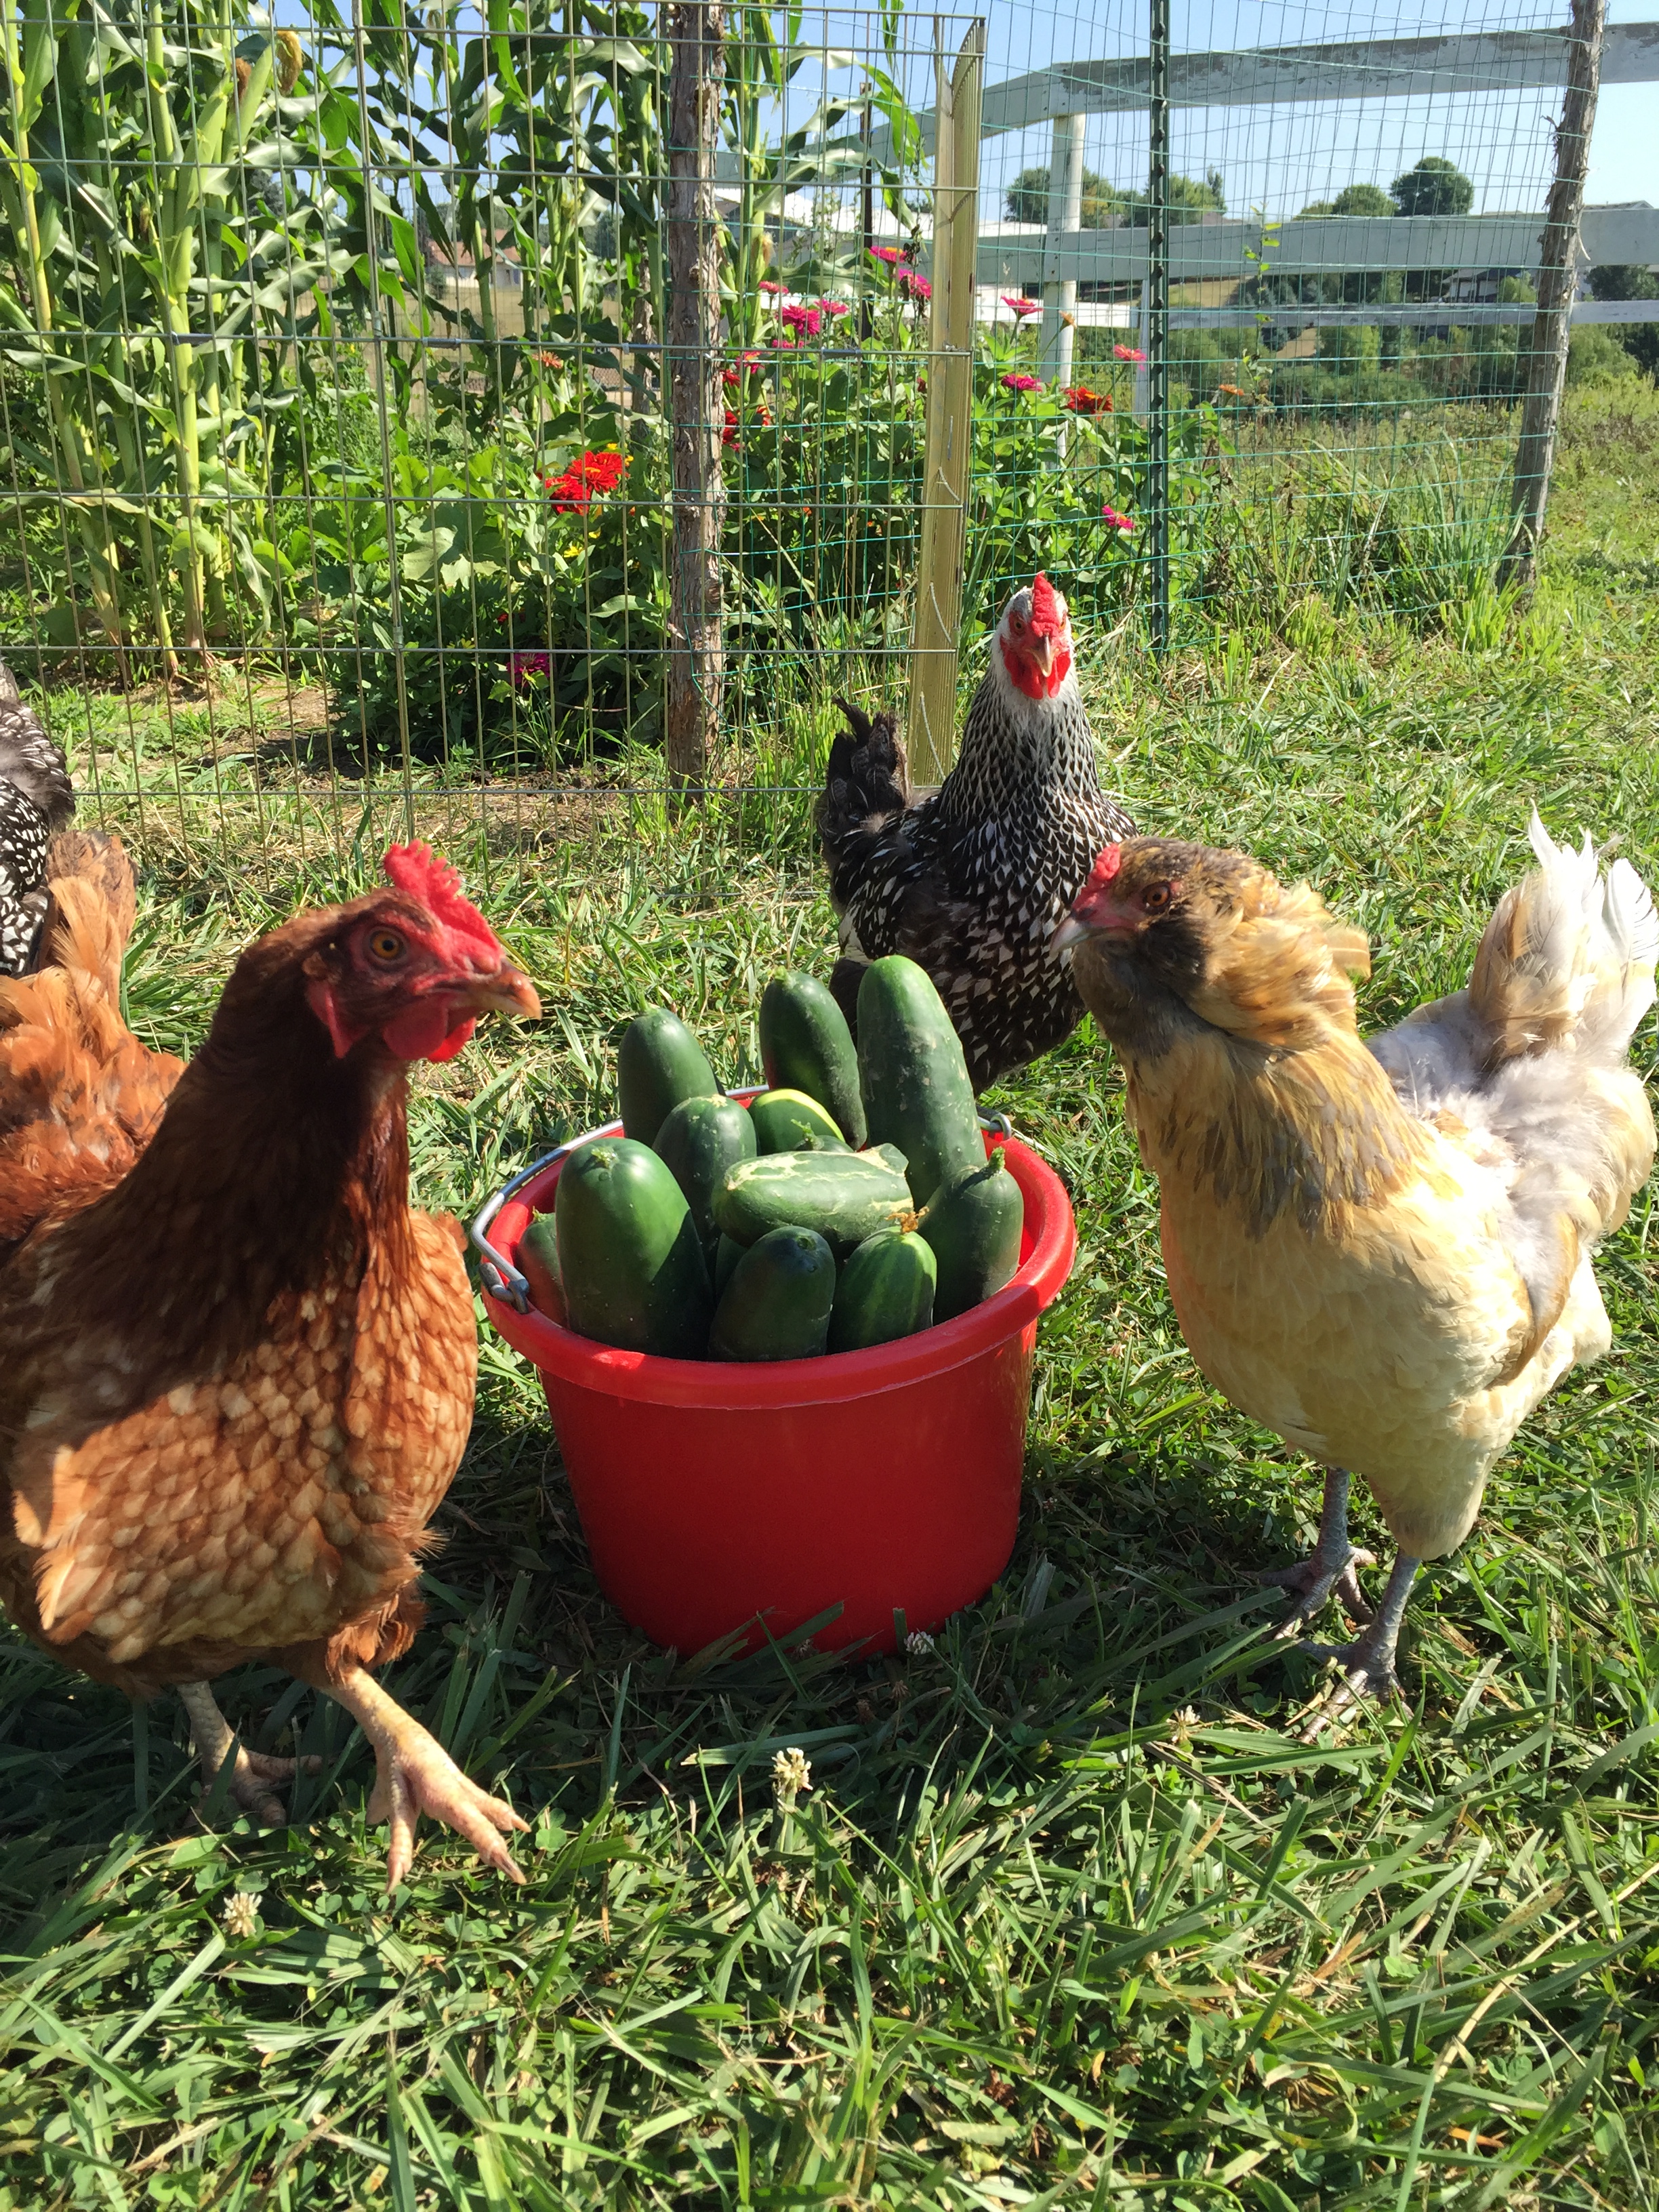 Chickens and Cucumbers.jpg